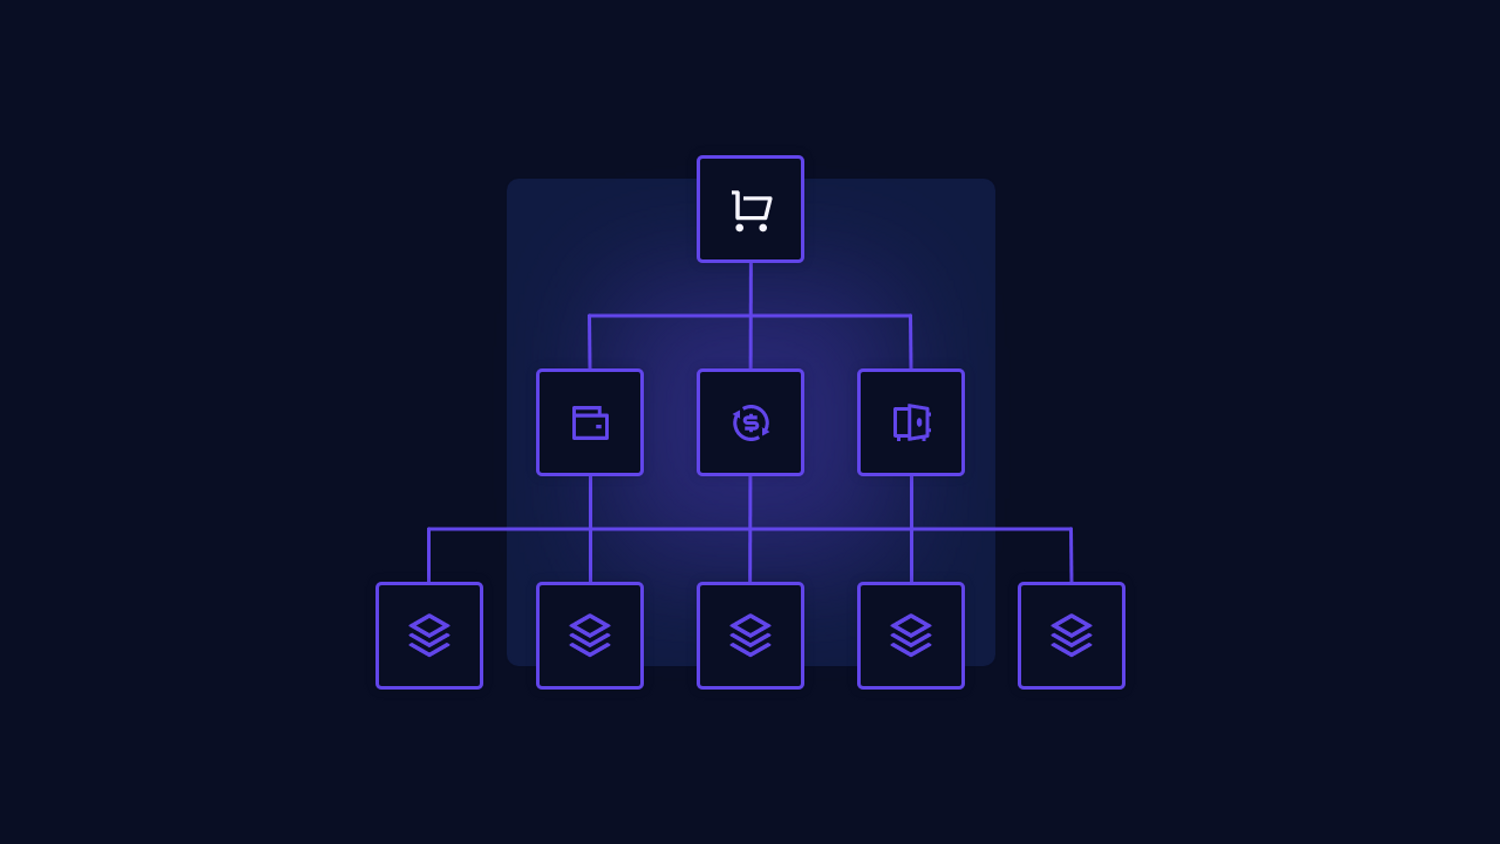 Architecture for Commerce Apps